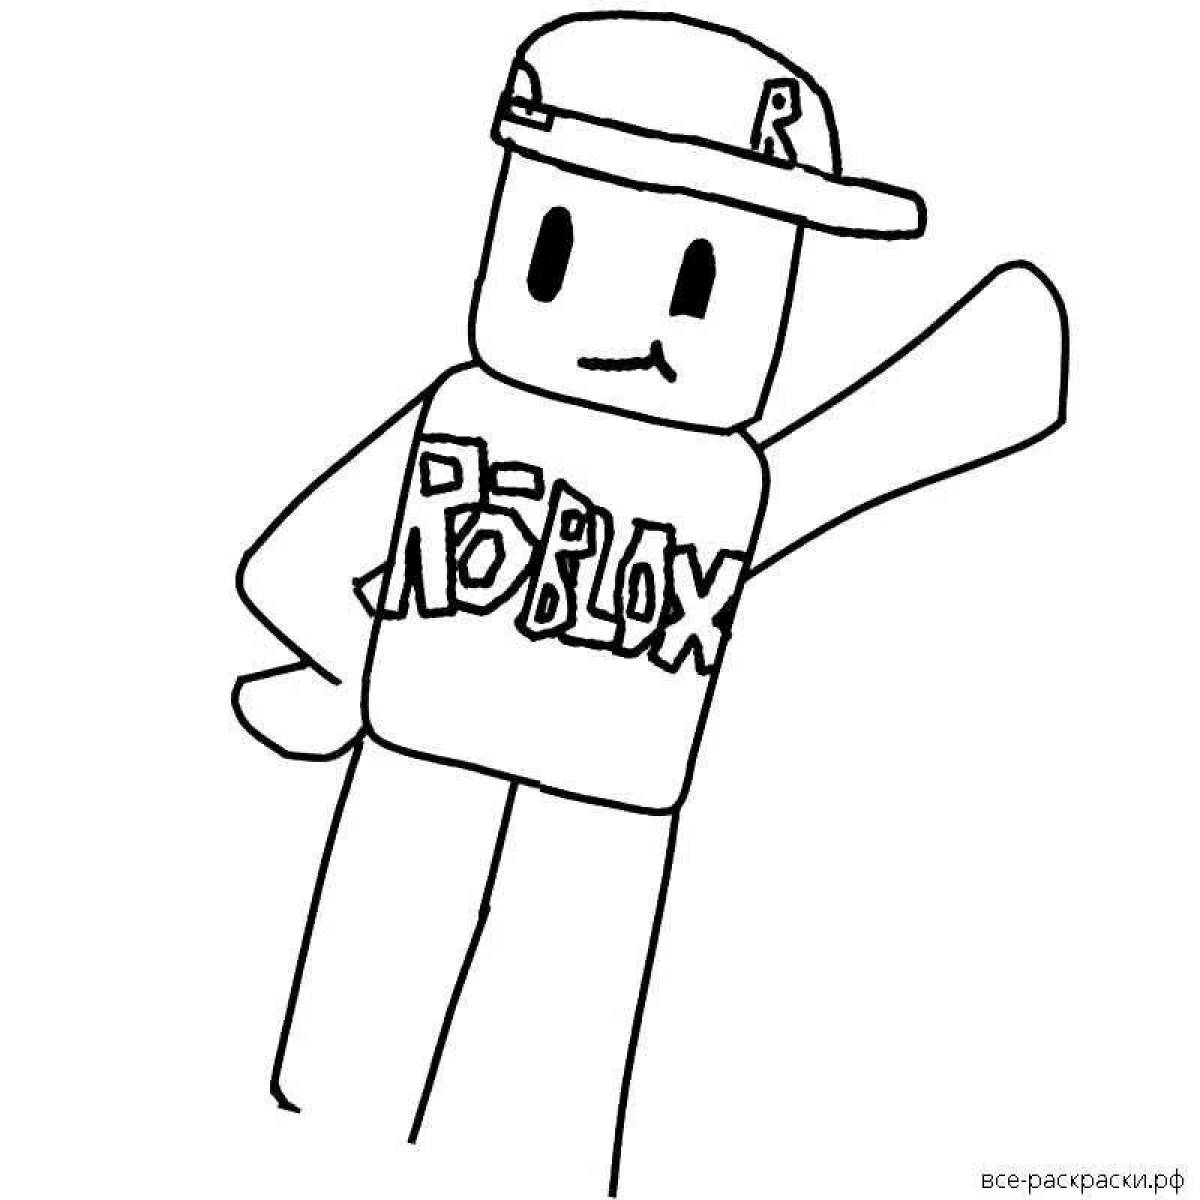 Awesome roblox robzi coloring page